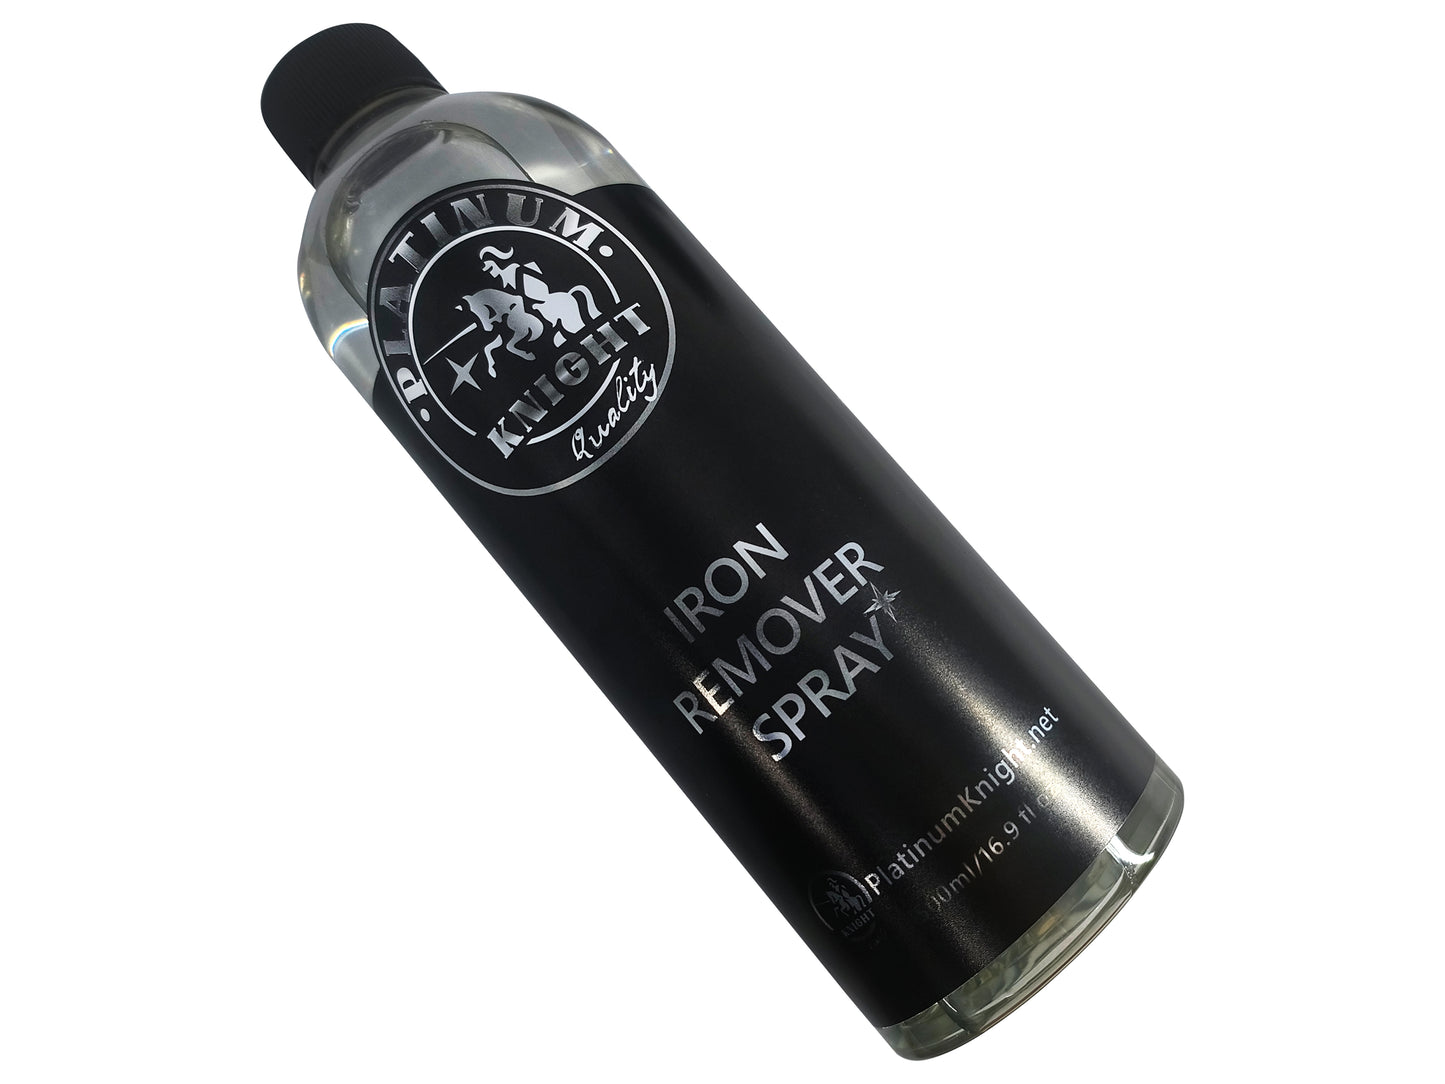 IRON REMOVER SPRAY 500ML - PLATINUM KNIGHT CLEANER FOR CAR